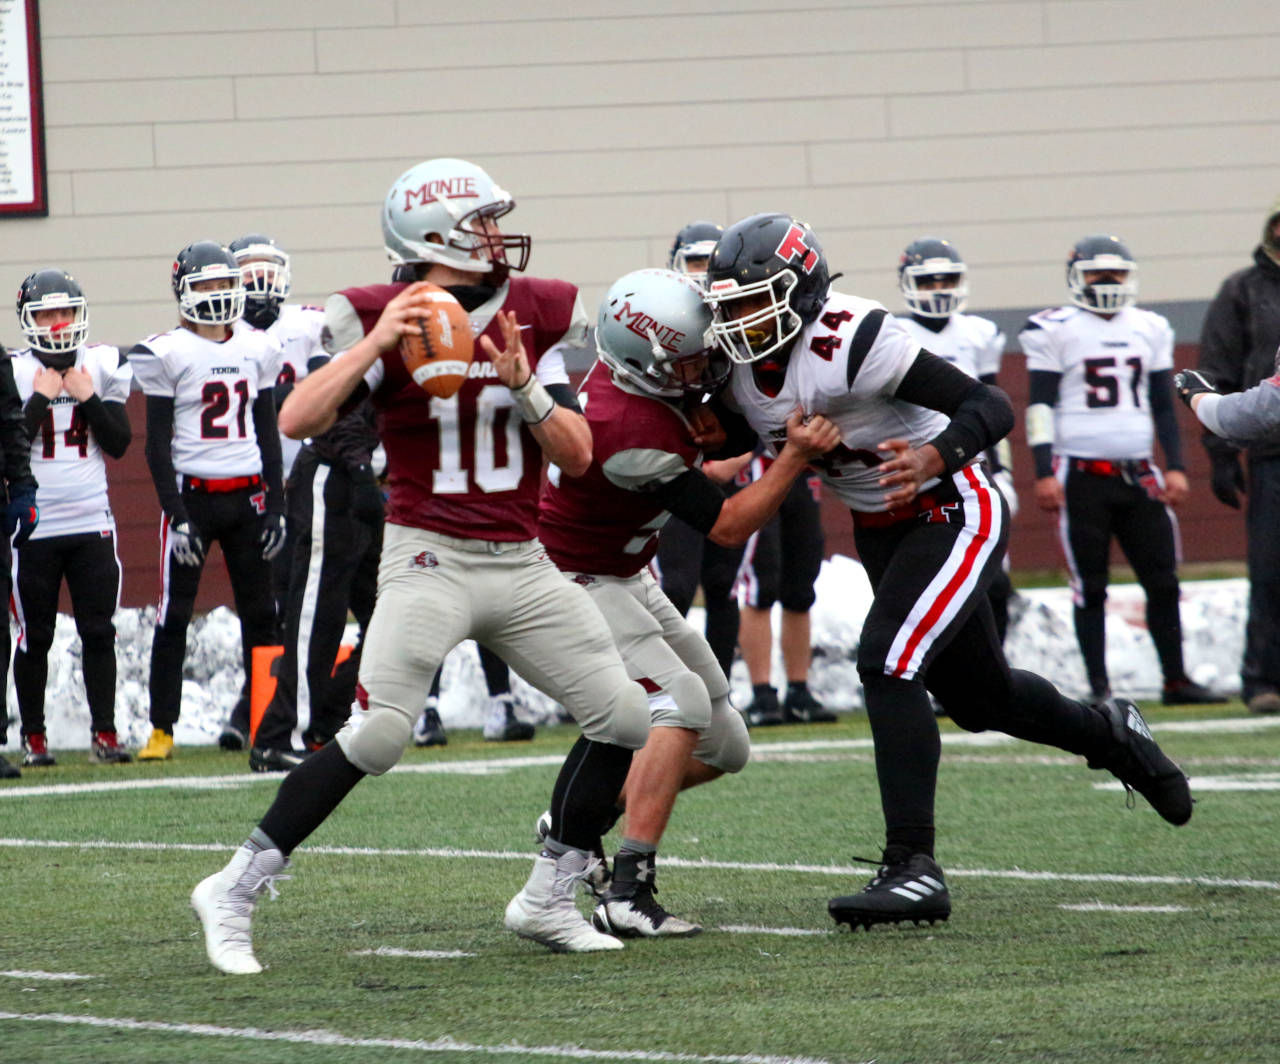 RYAN SPARKS / THE DAILY WORLD
Montesano quarterback Trace Ridgway makes a pass against Tenino on Monday in Montesano.